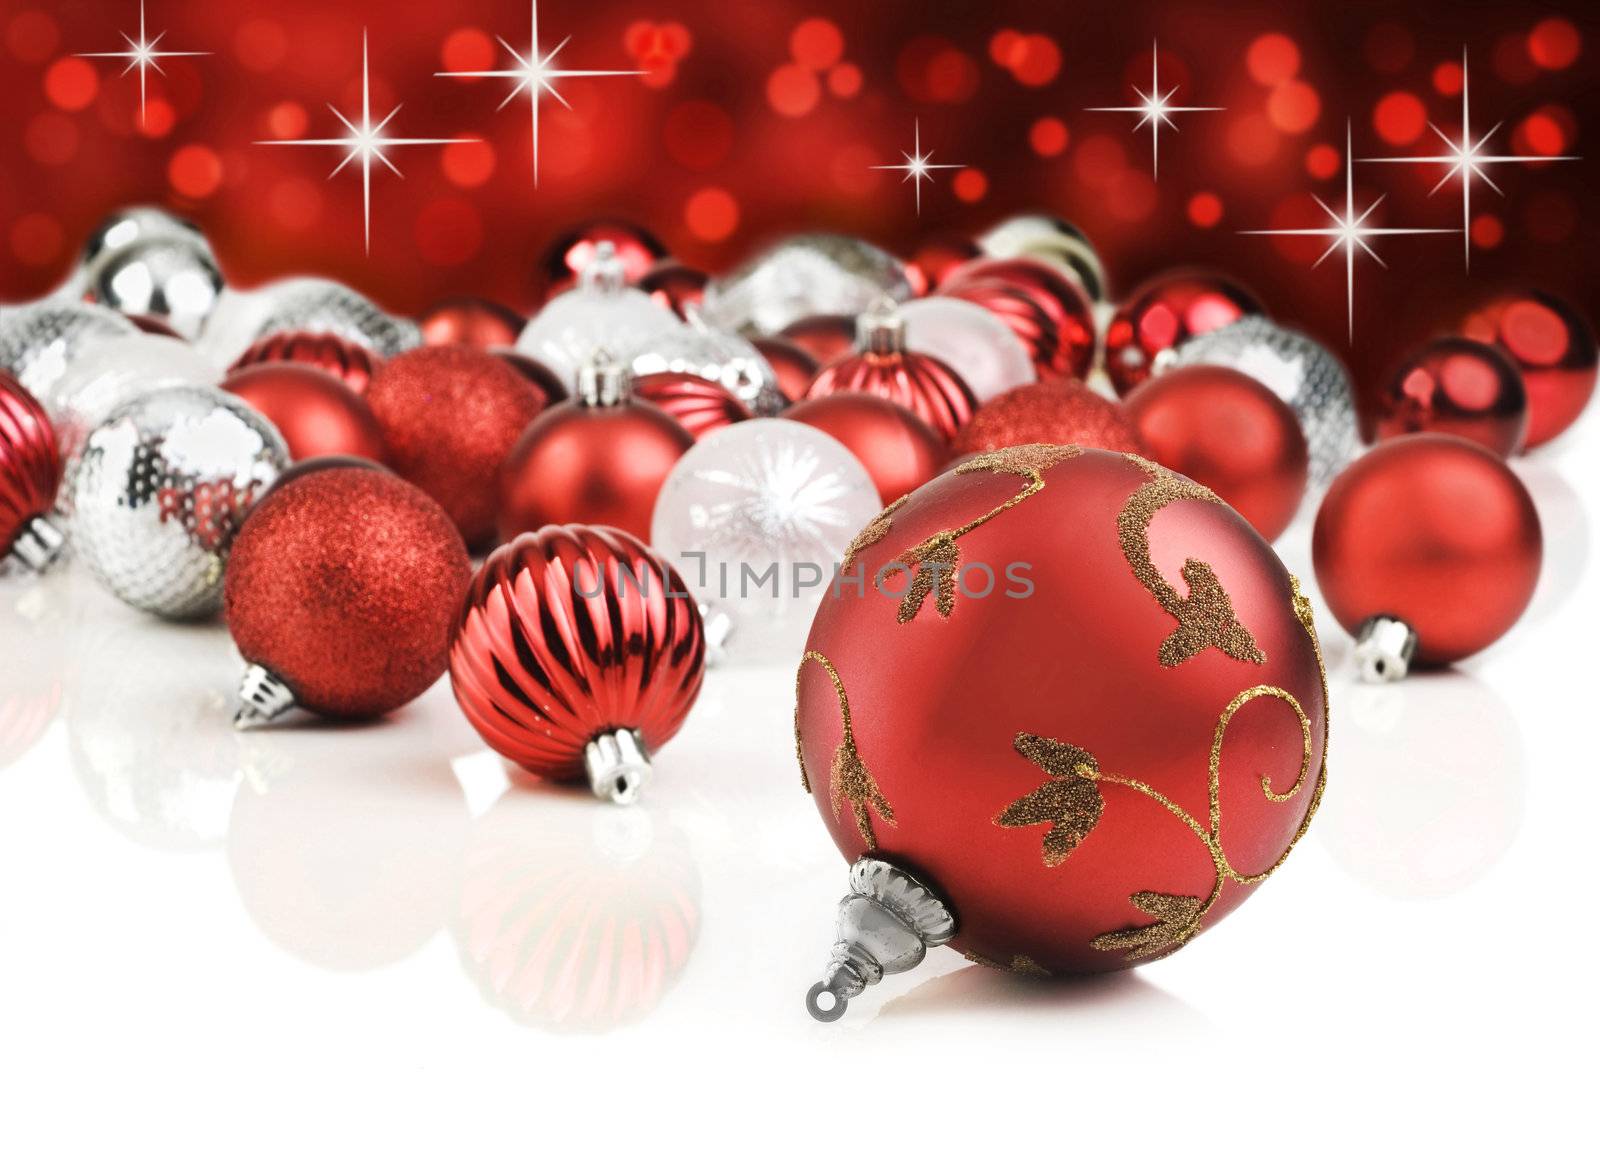 Red decorative christmas ornaments with star background by tish1